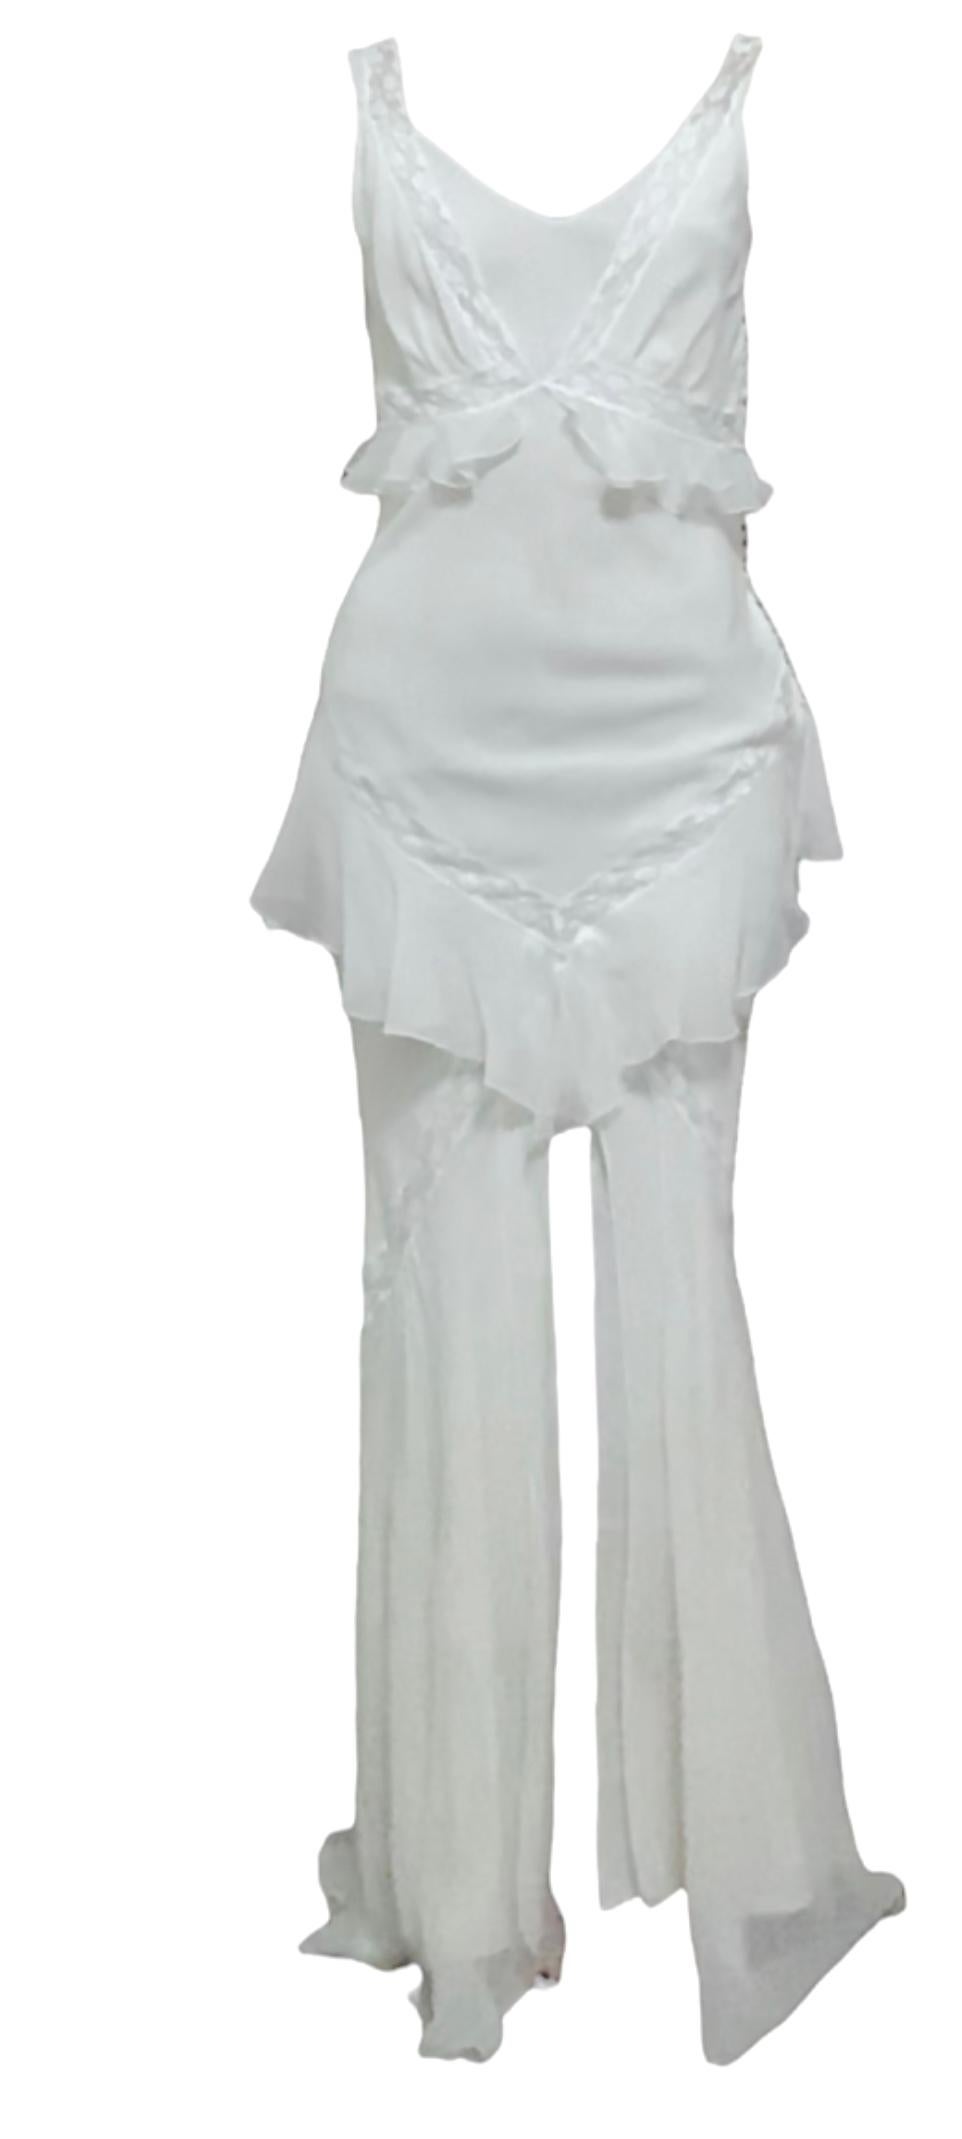 Rare, white silk Christian Dior by John Galliano from the Spring Summer 1999 collection. This two-piece gown features a simple white silk slip overlaid with a lace and ruffled layer with a plunging neckline and low cowl back. They belong together